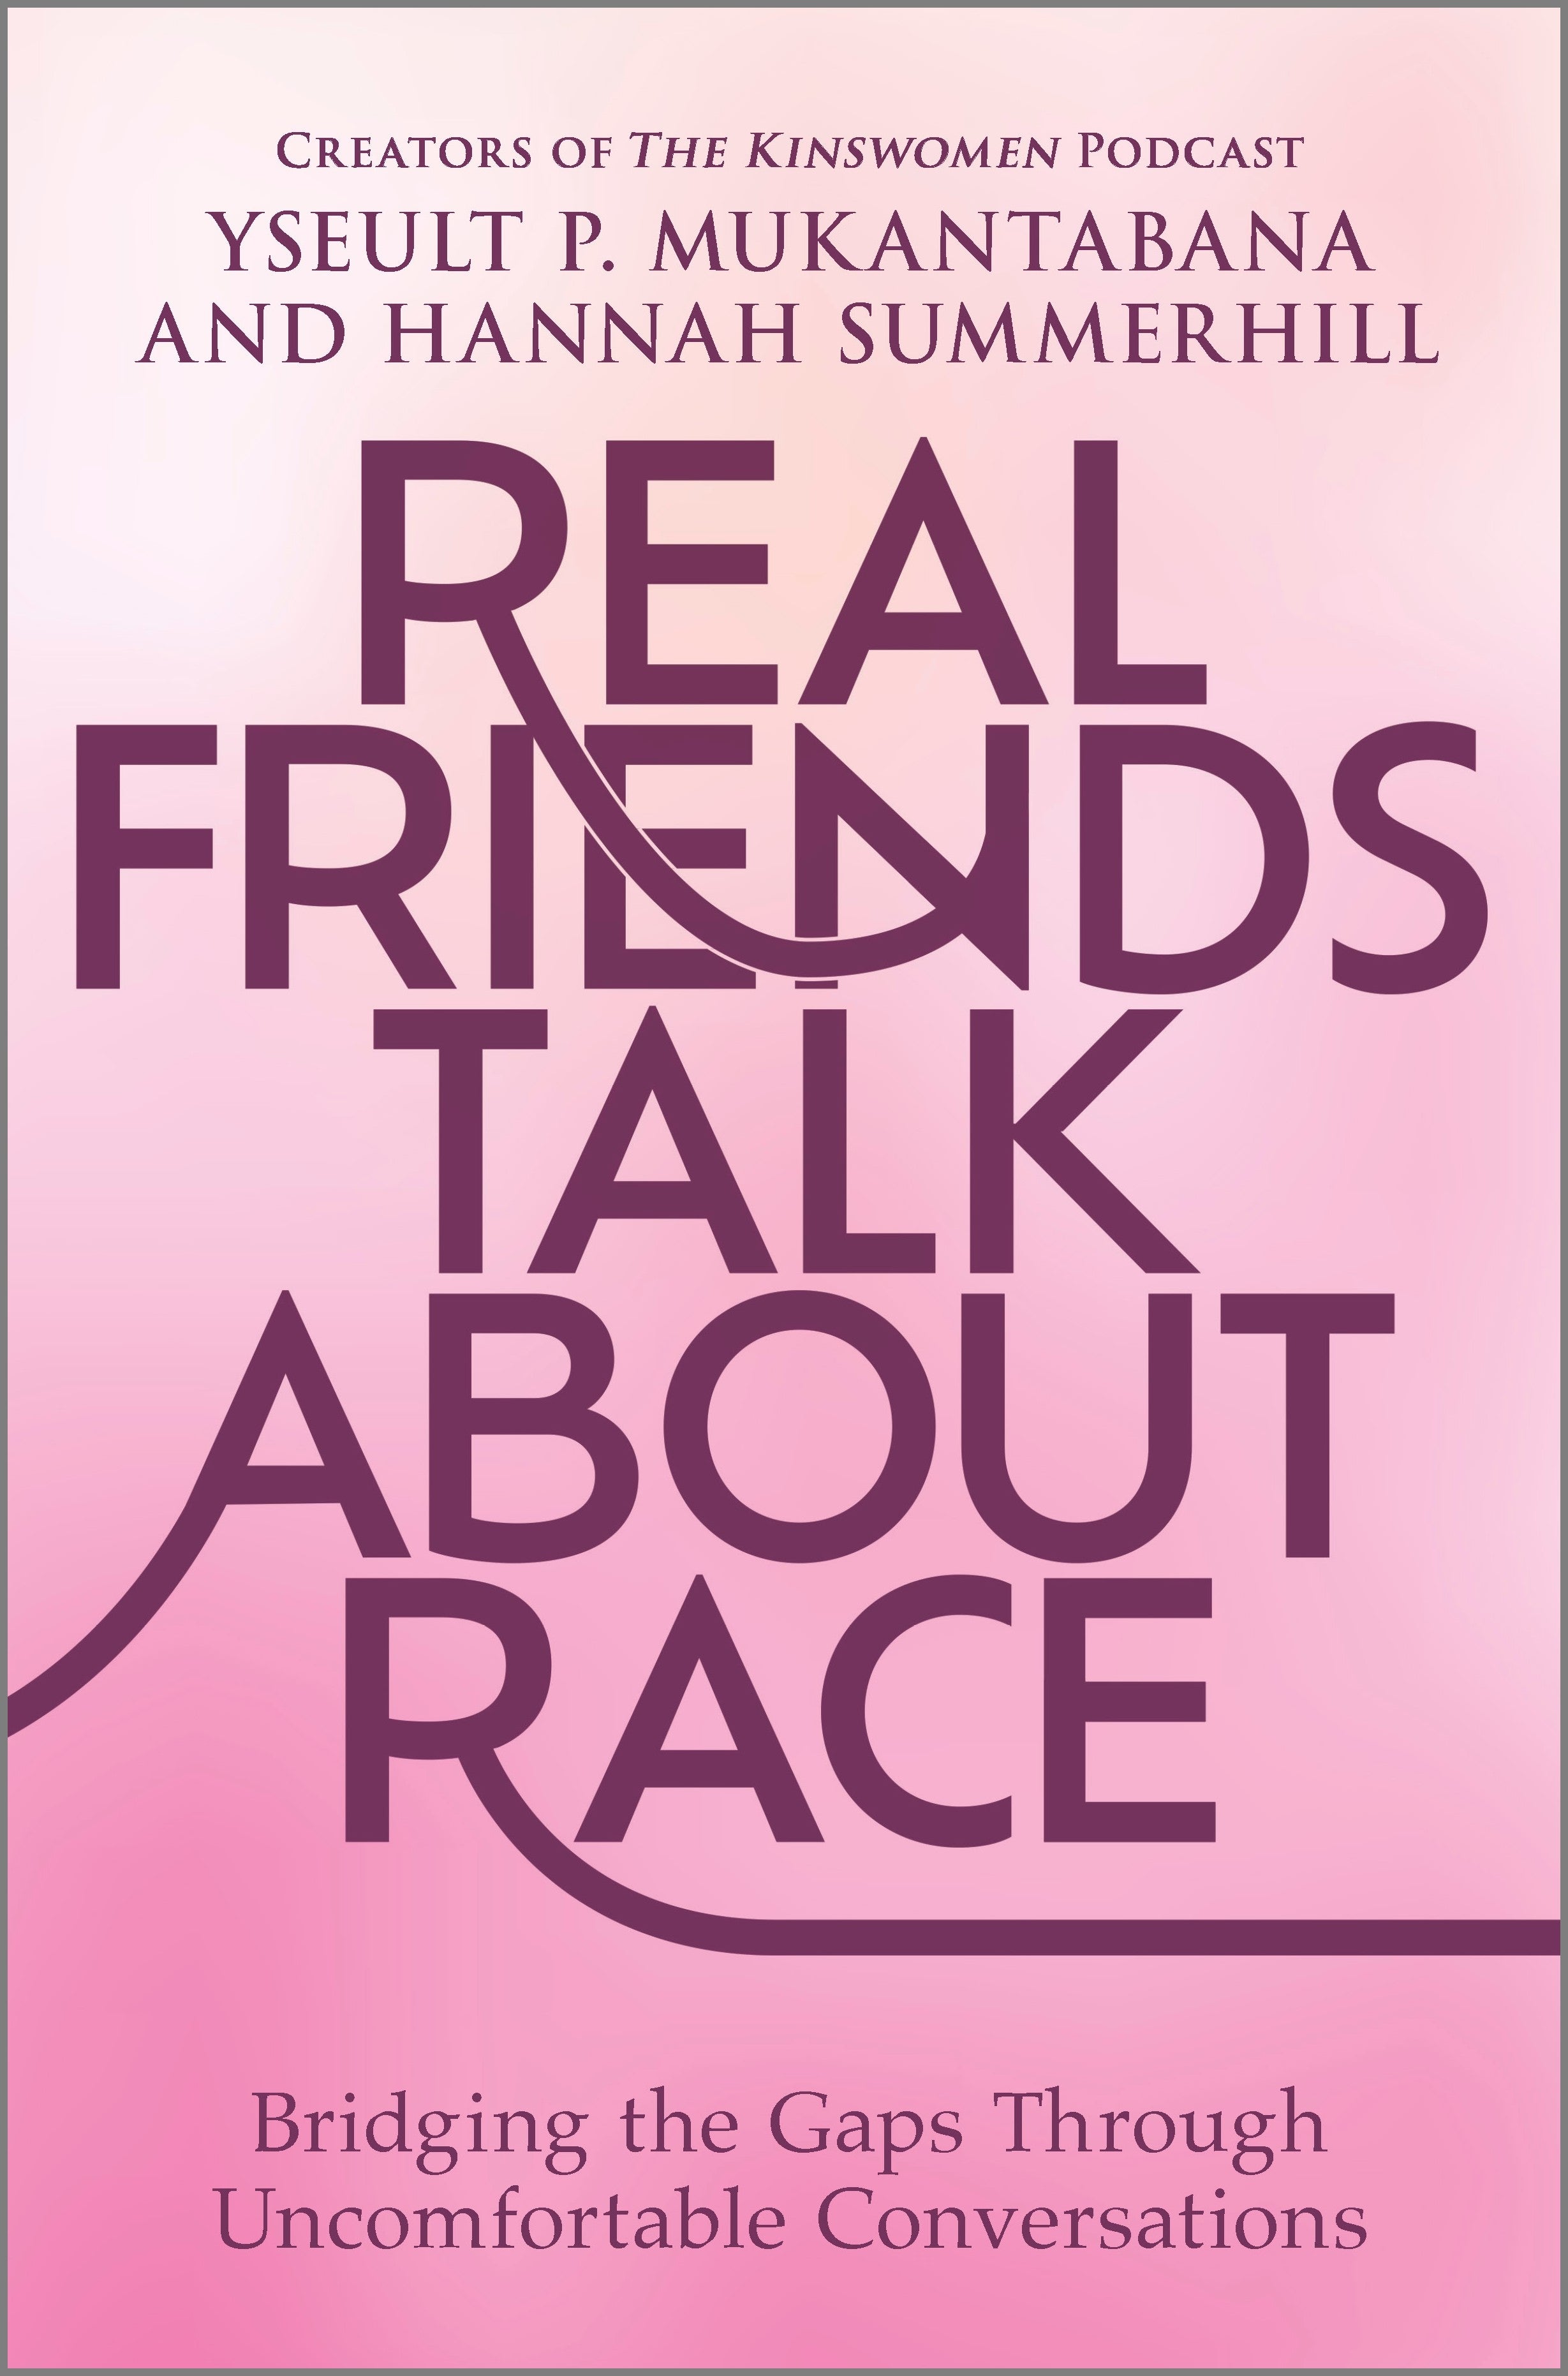 Real Friends Talk About Race